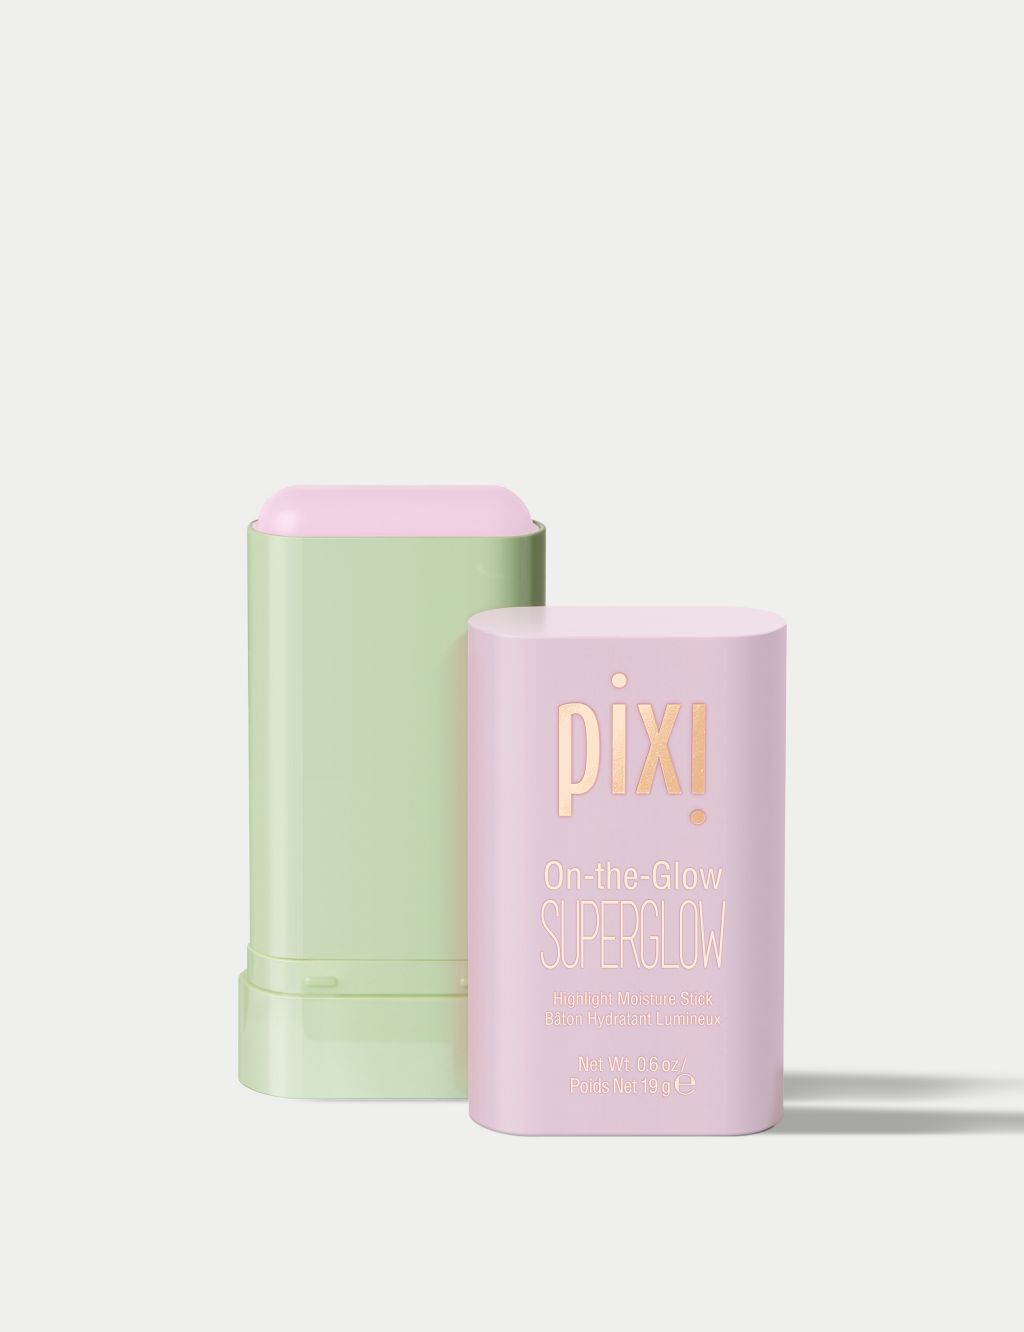 Pixi On-The-Glow Superglow Highlighter 19g